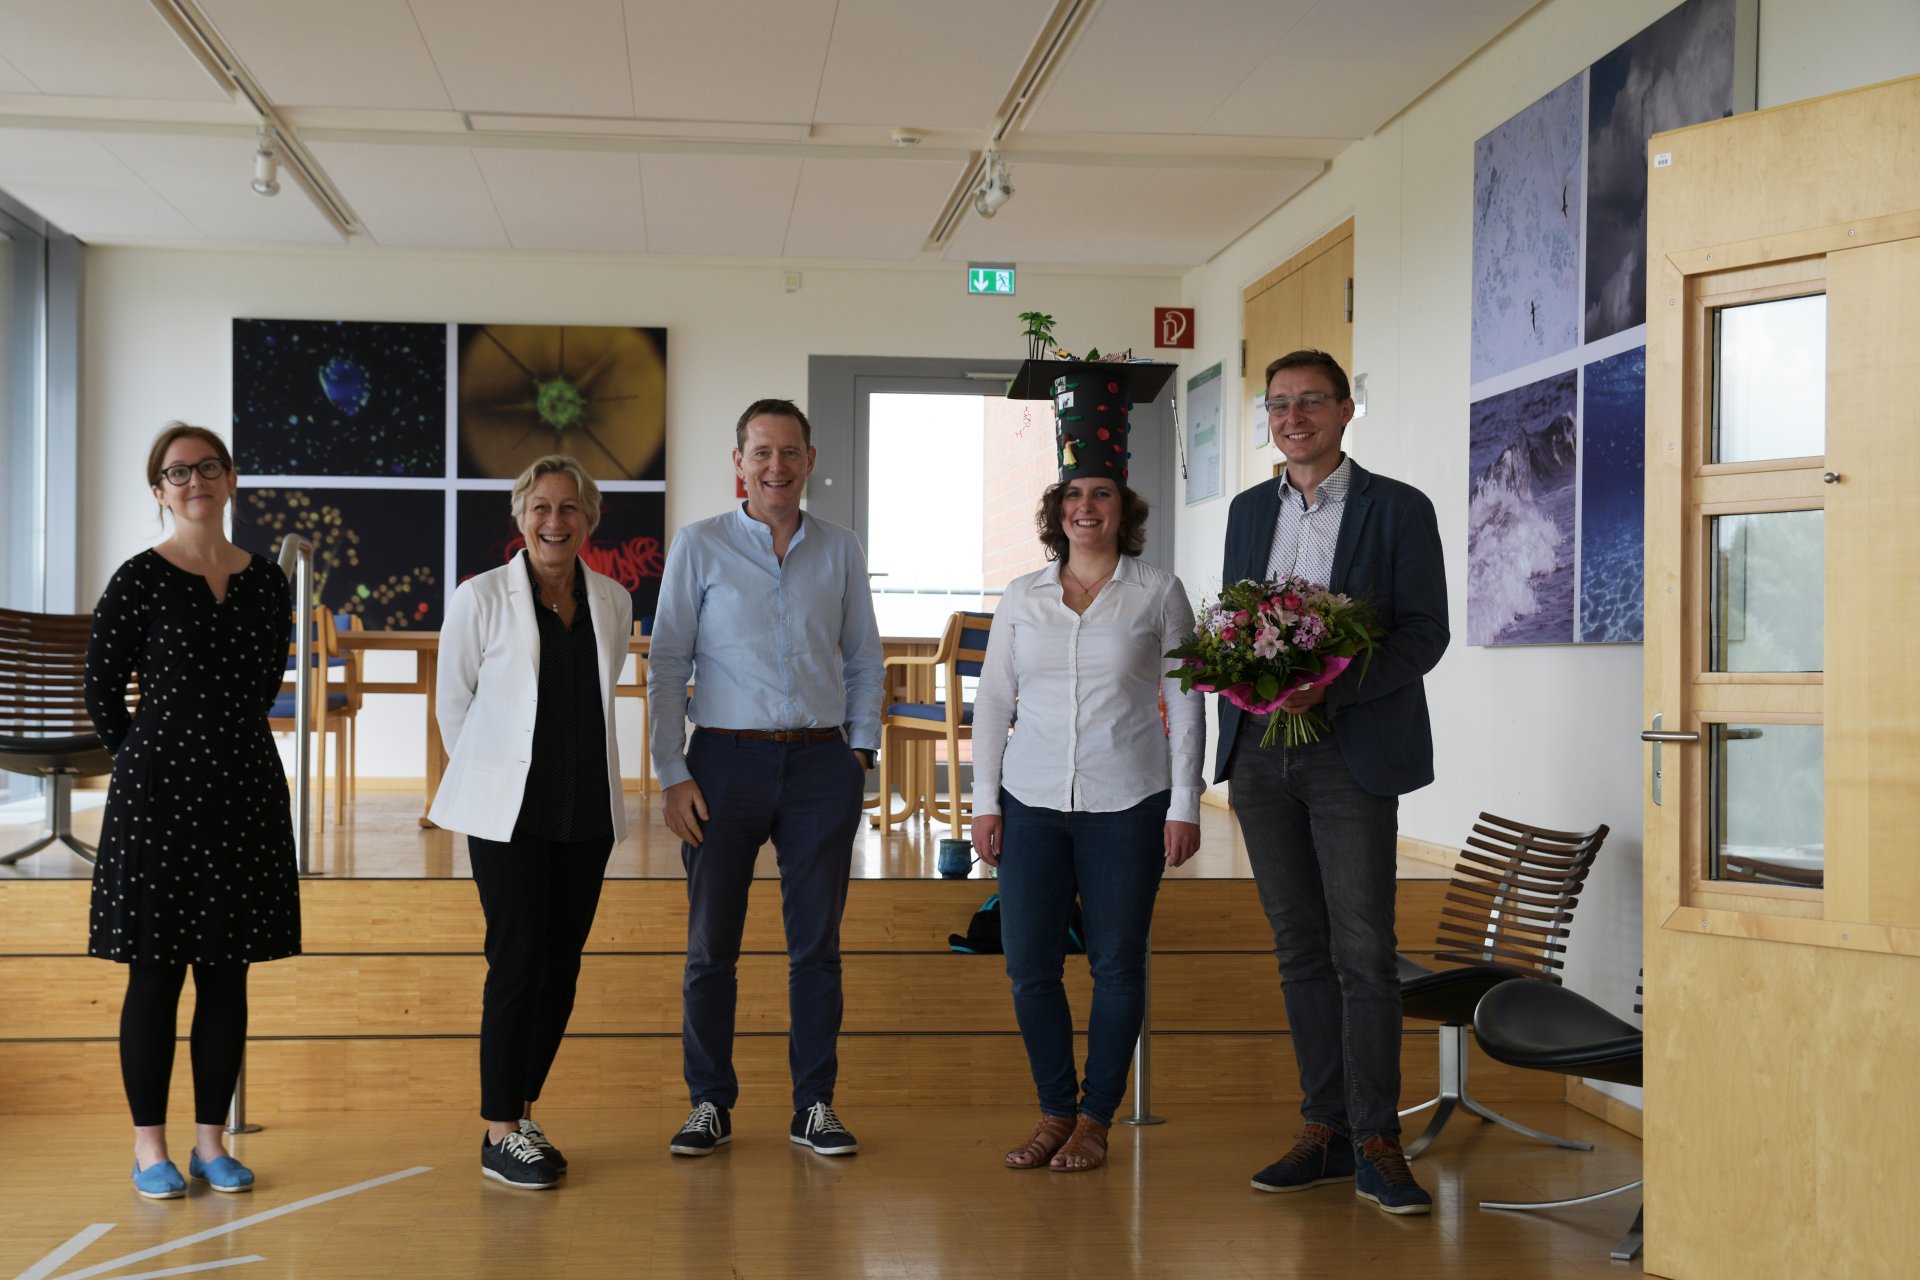 Congratulations: Dolma got her hat! (from left to right: Dr. Elizabeth Hambleton, Prof. Dr. Nicole Dubilier, Prof. Dr. Marcel Kuypers, Dolma Michellod, Dr. Manuel Liebeke) © Max Franke